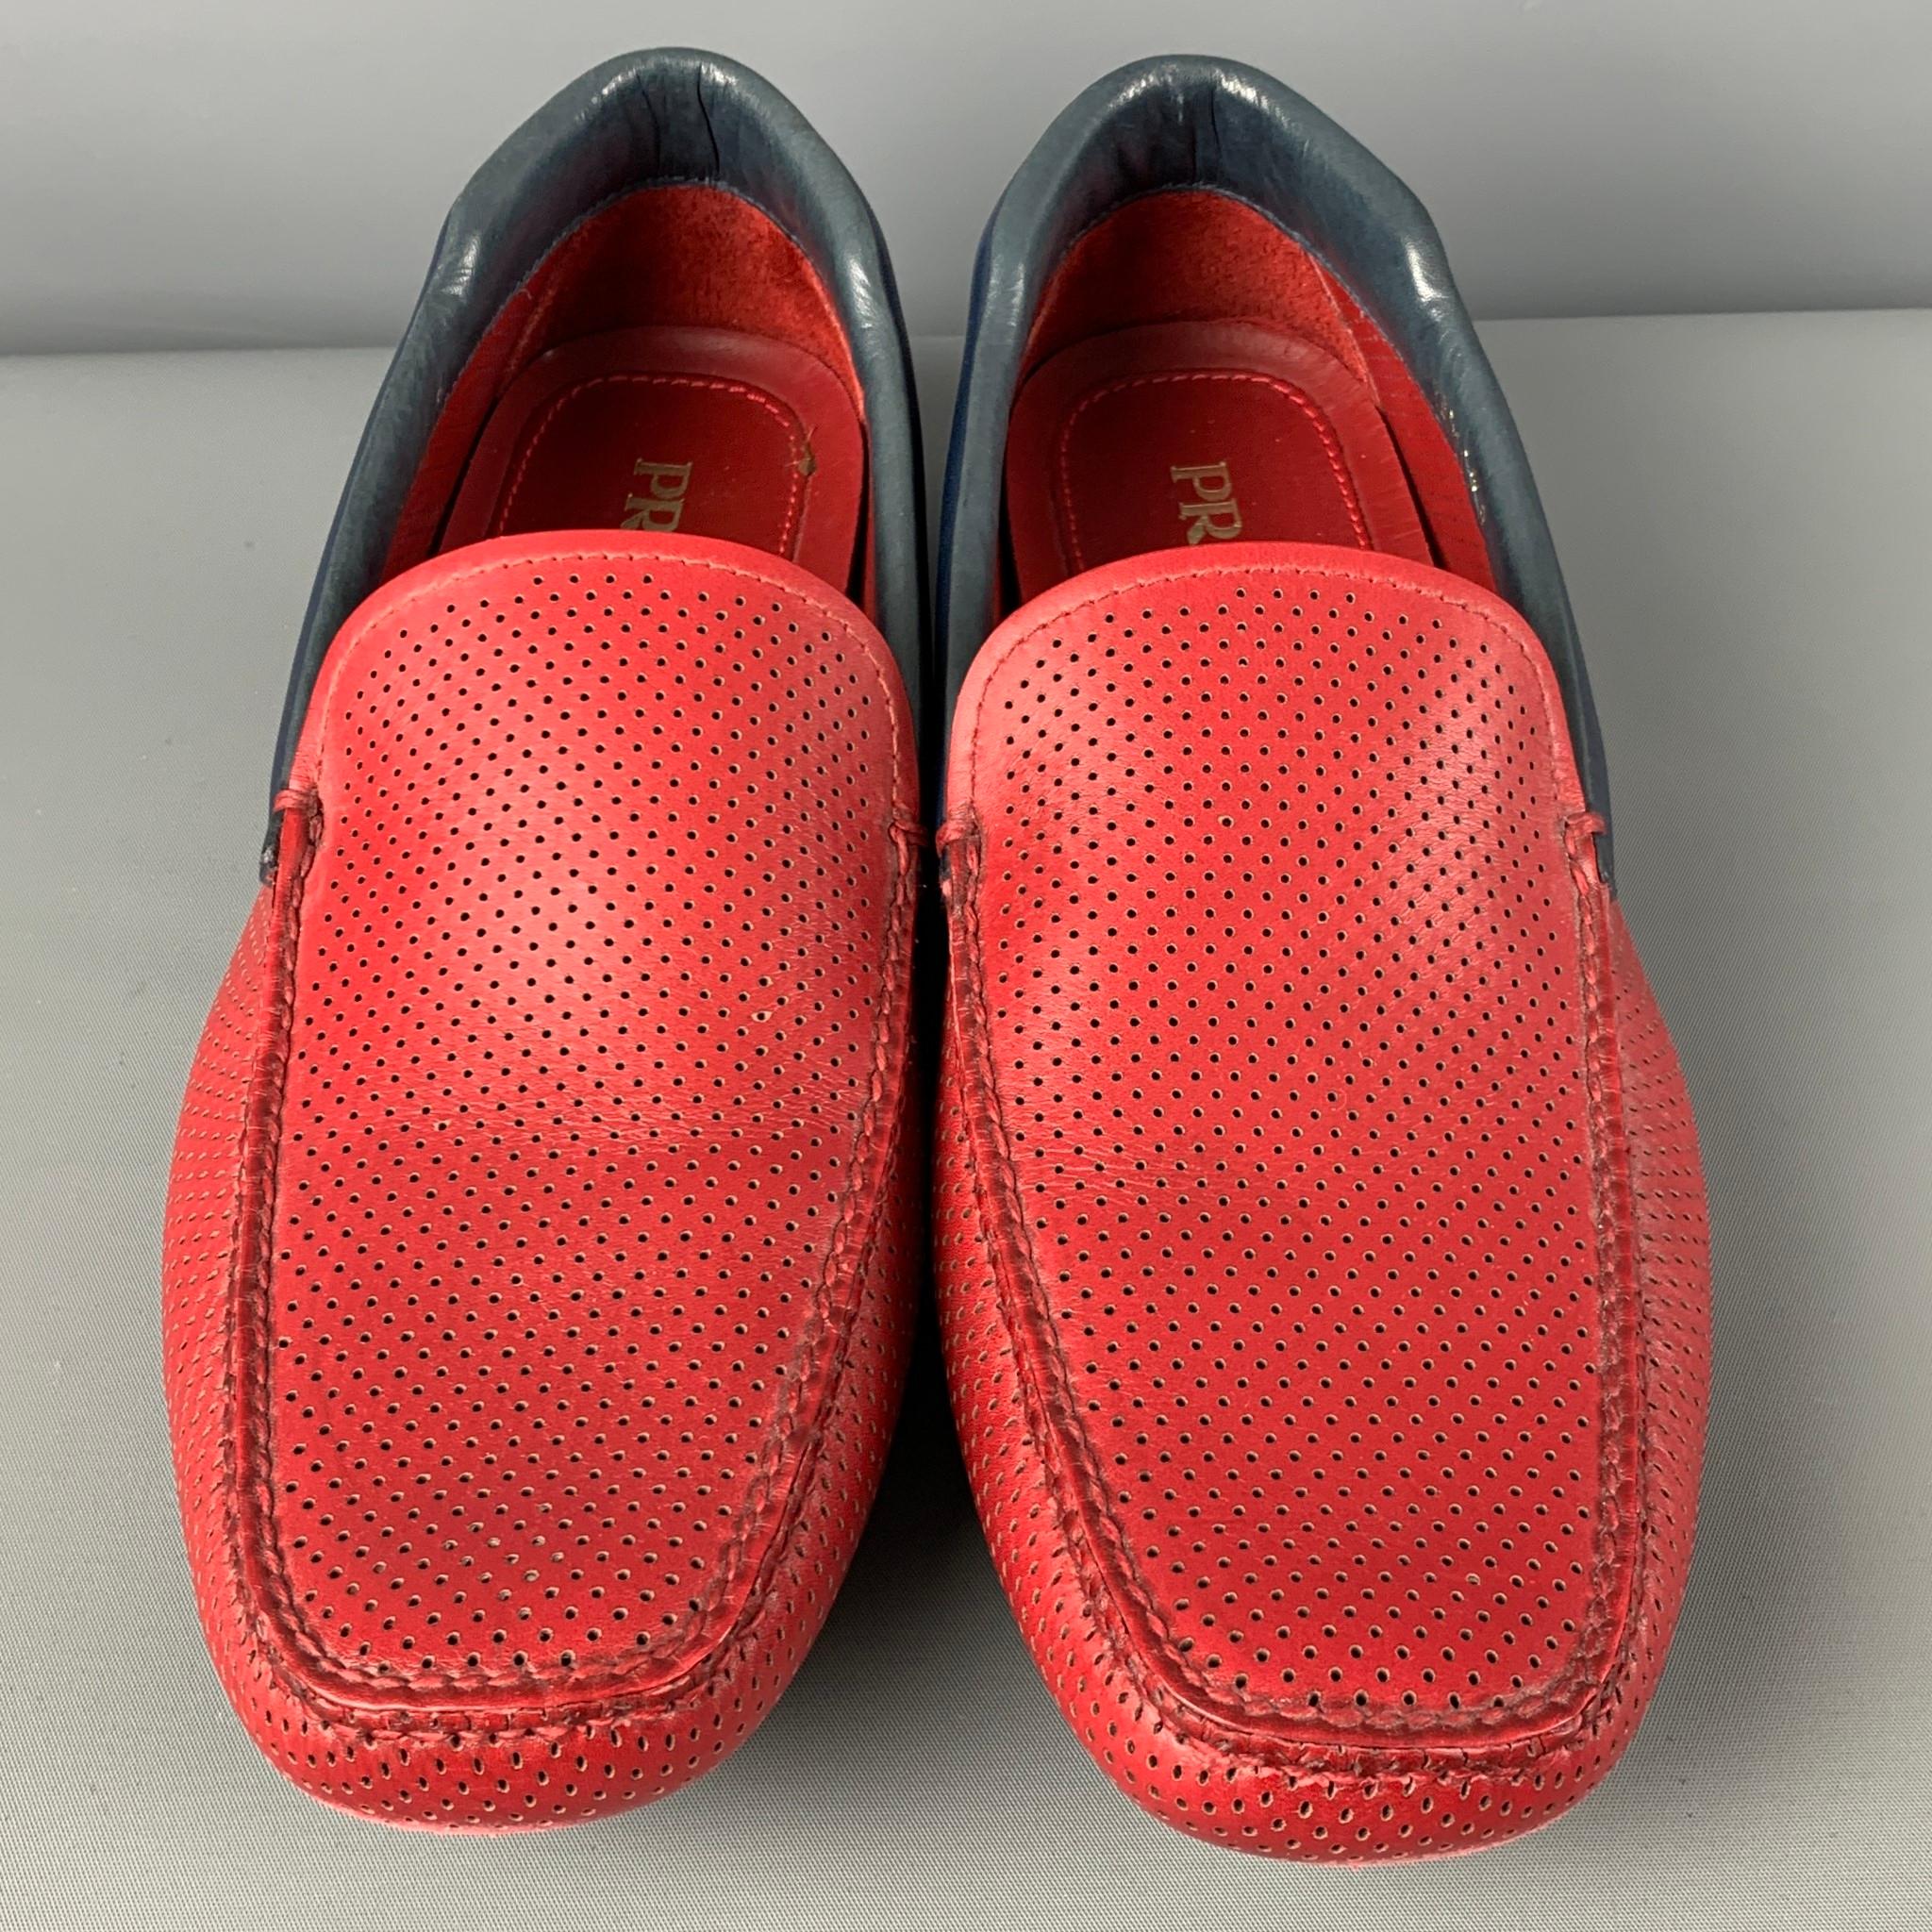 Men's PRADA Size 10 Red Perforated Leather Square Toe Loafers